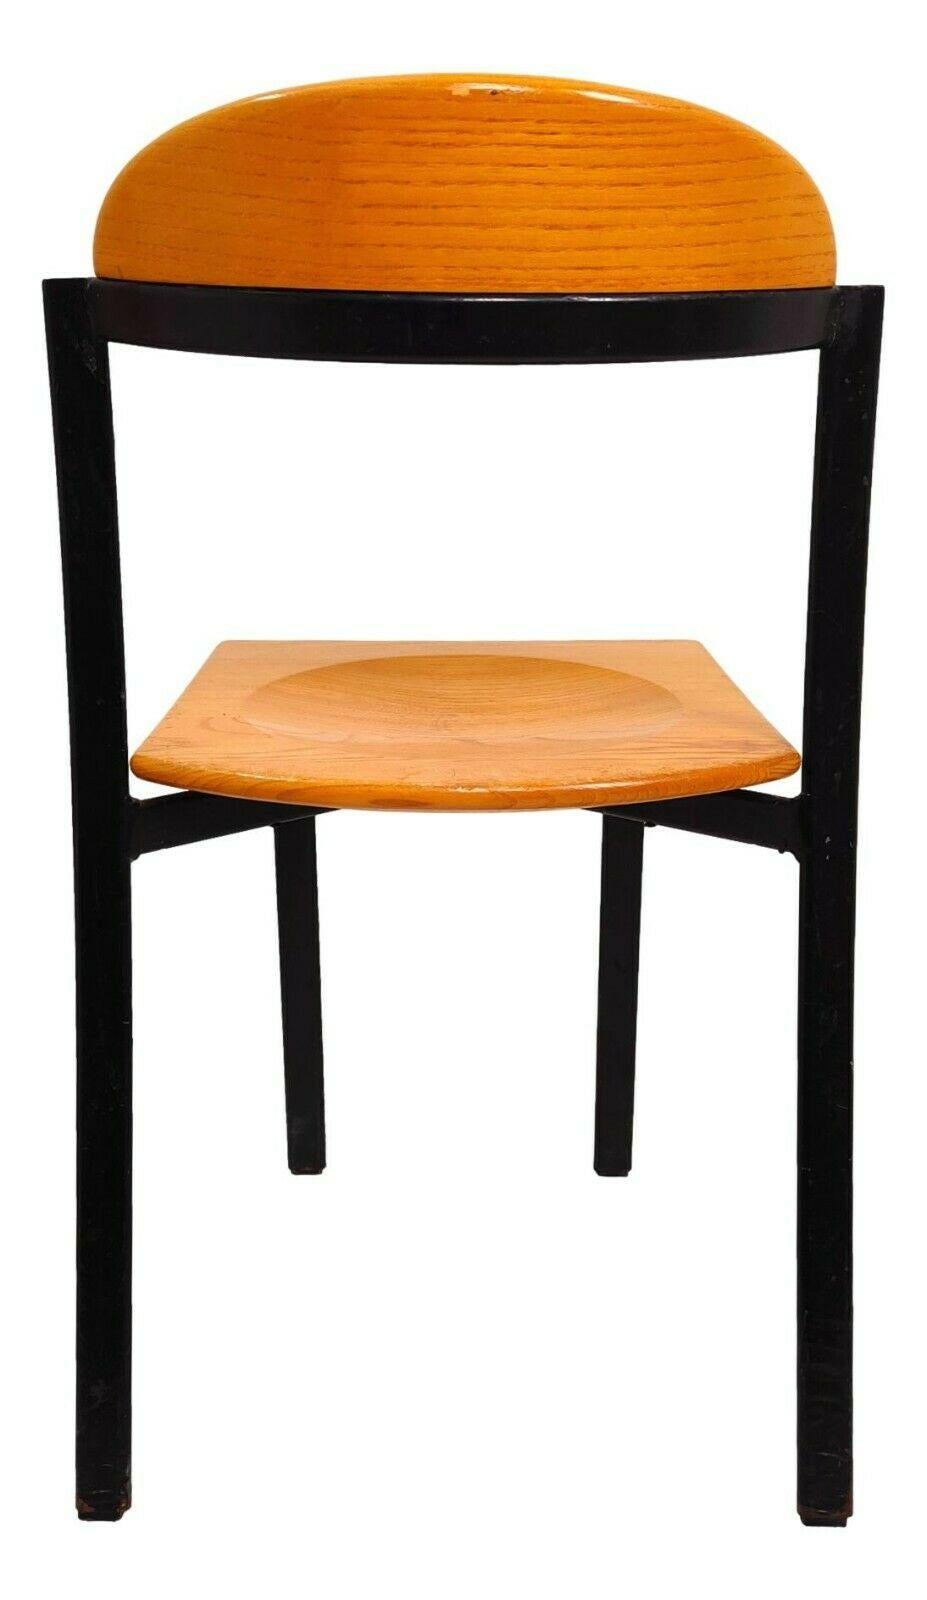 Set of four original design chairs from the 70s, made on a black lacquered metal structure, seat and back in wood

They measure 78 cm in height, 46 cm in width, 40 cm in depth and 46.5 cm in height of the seat from the ground

Very good